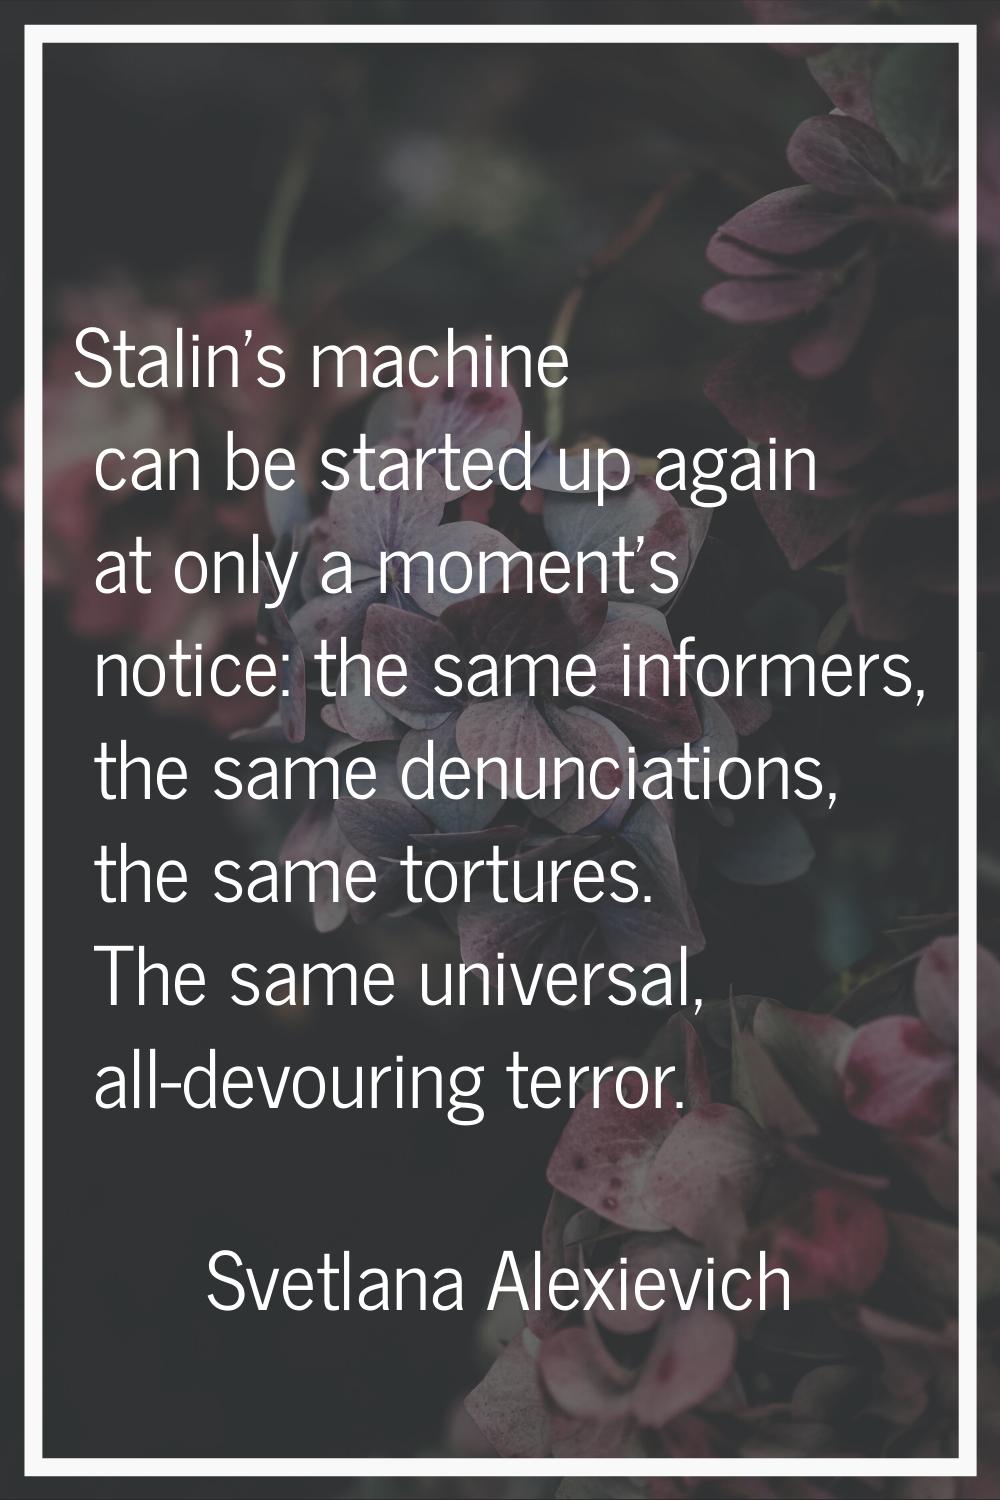 Stalin's machine can be started up again at only a moment's notice: the same informers, the same de